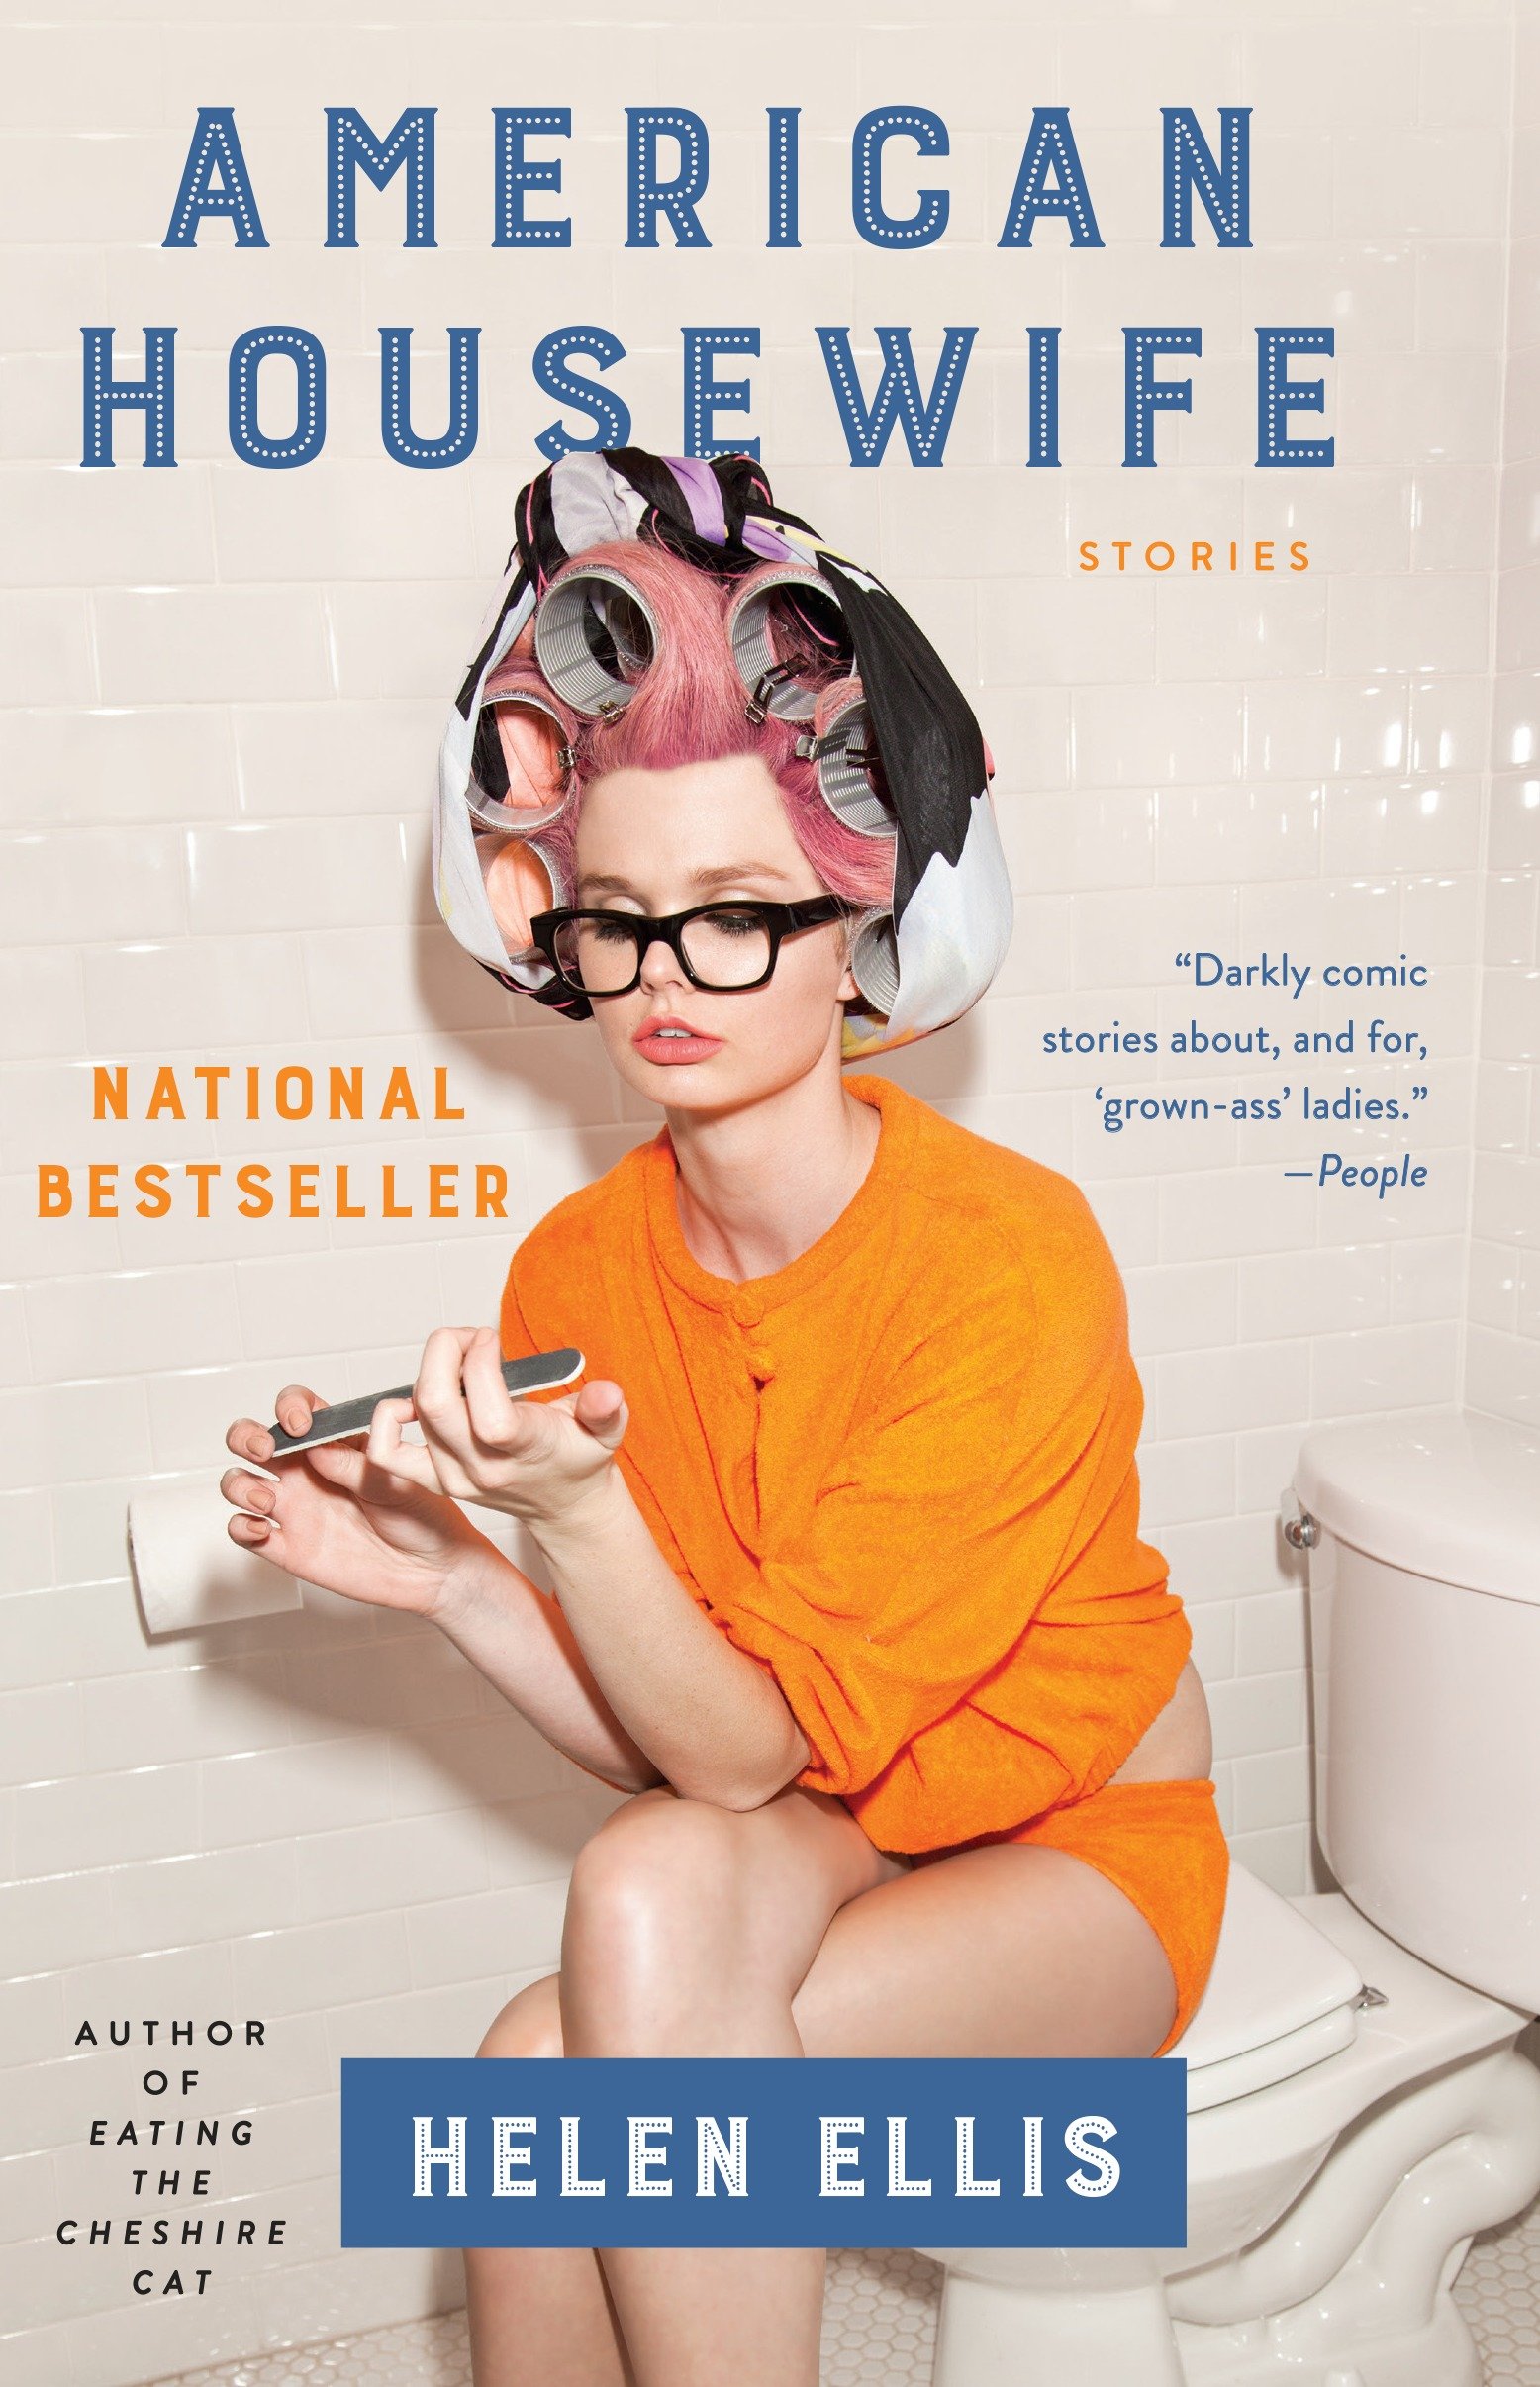 American housewife stories cover image